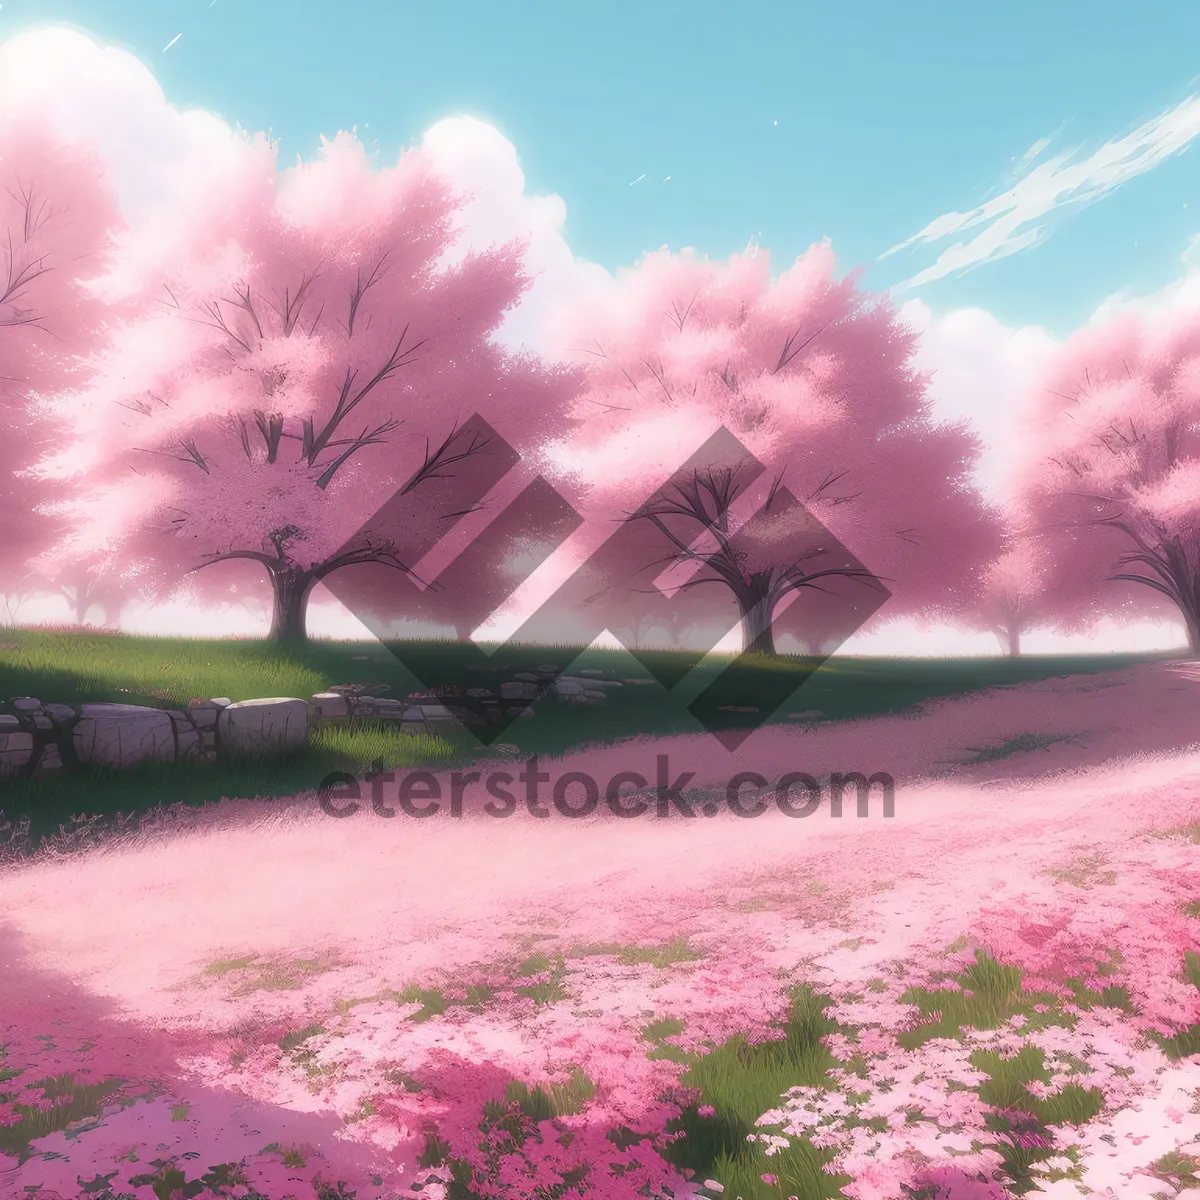 Picture of Pink Rhododendron Blooming in Scenic Landscape